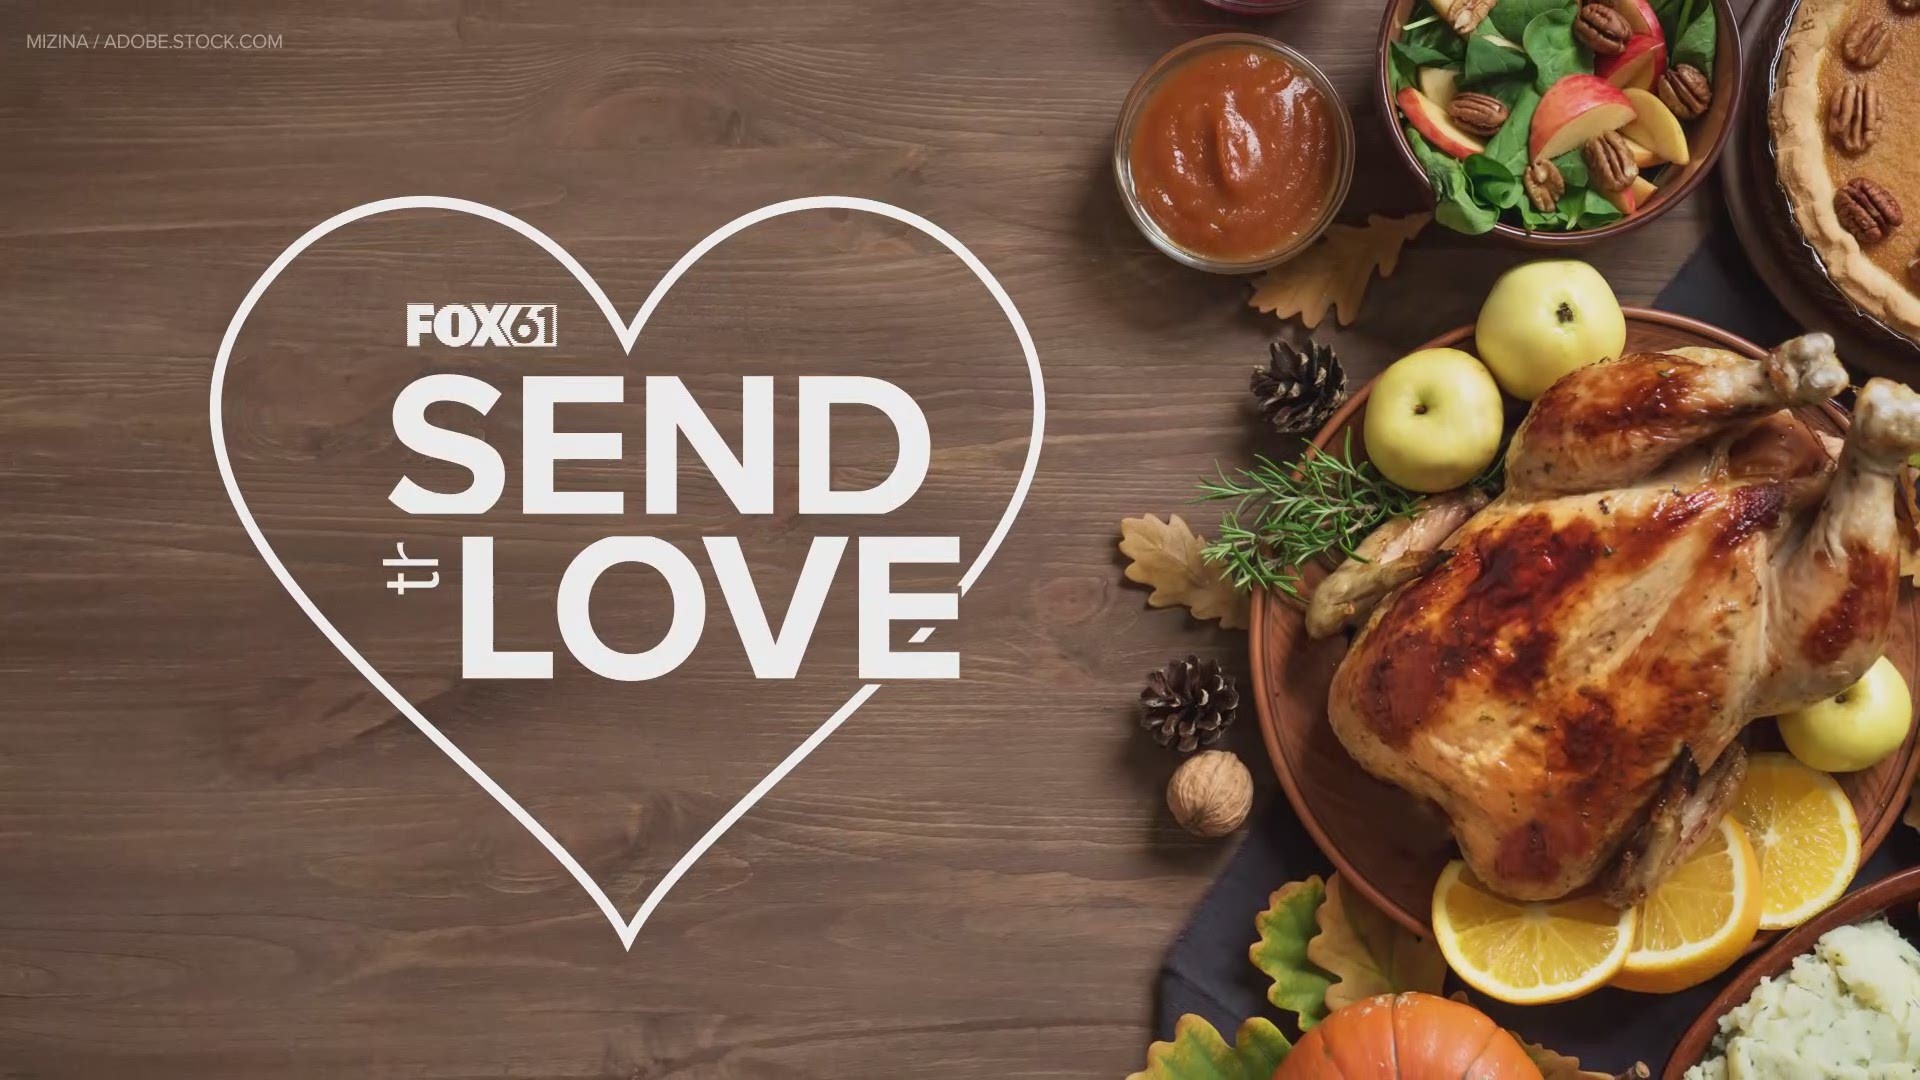 FOX61 wants to help you 'Send The Love' to your family and friends who you may not be seeing this Thanksgiving due to the pandemic.